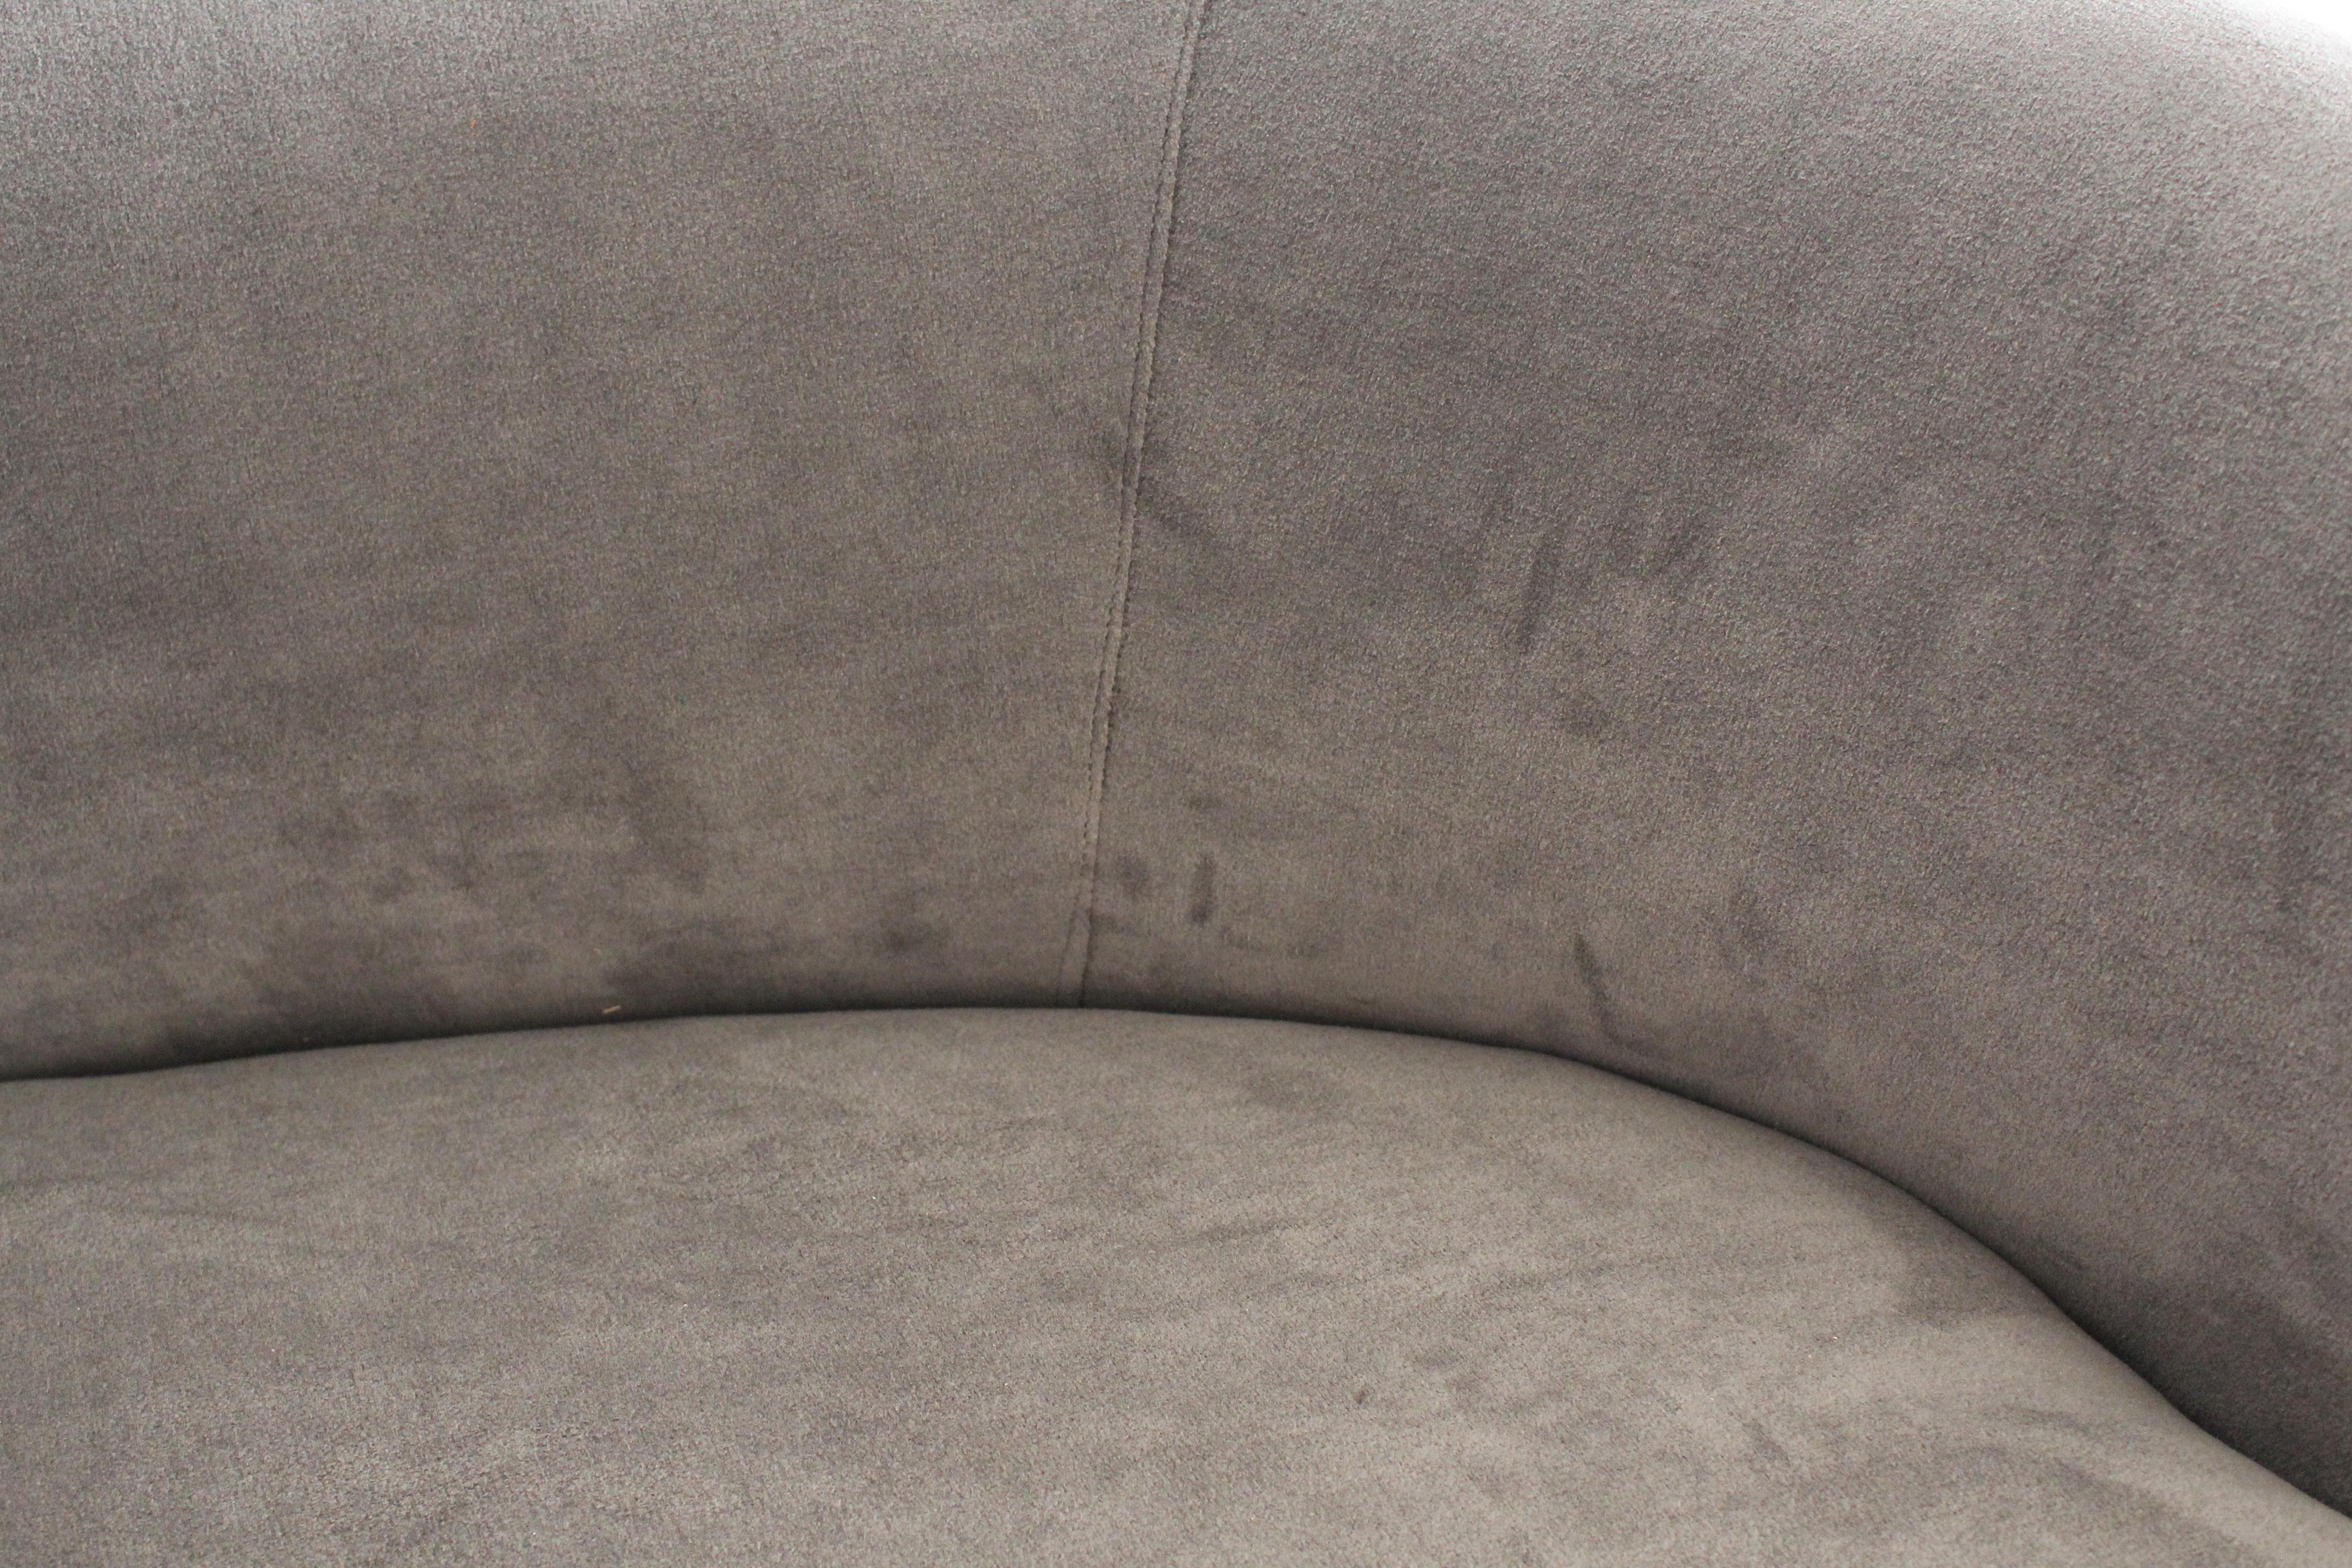 Amazing curved kidney shaped sofas recently upholstered in a lovely velvet fabric in the shade of taupe. Sofas measure 30